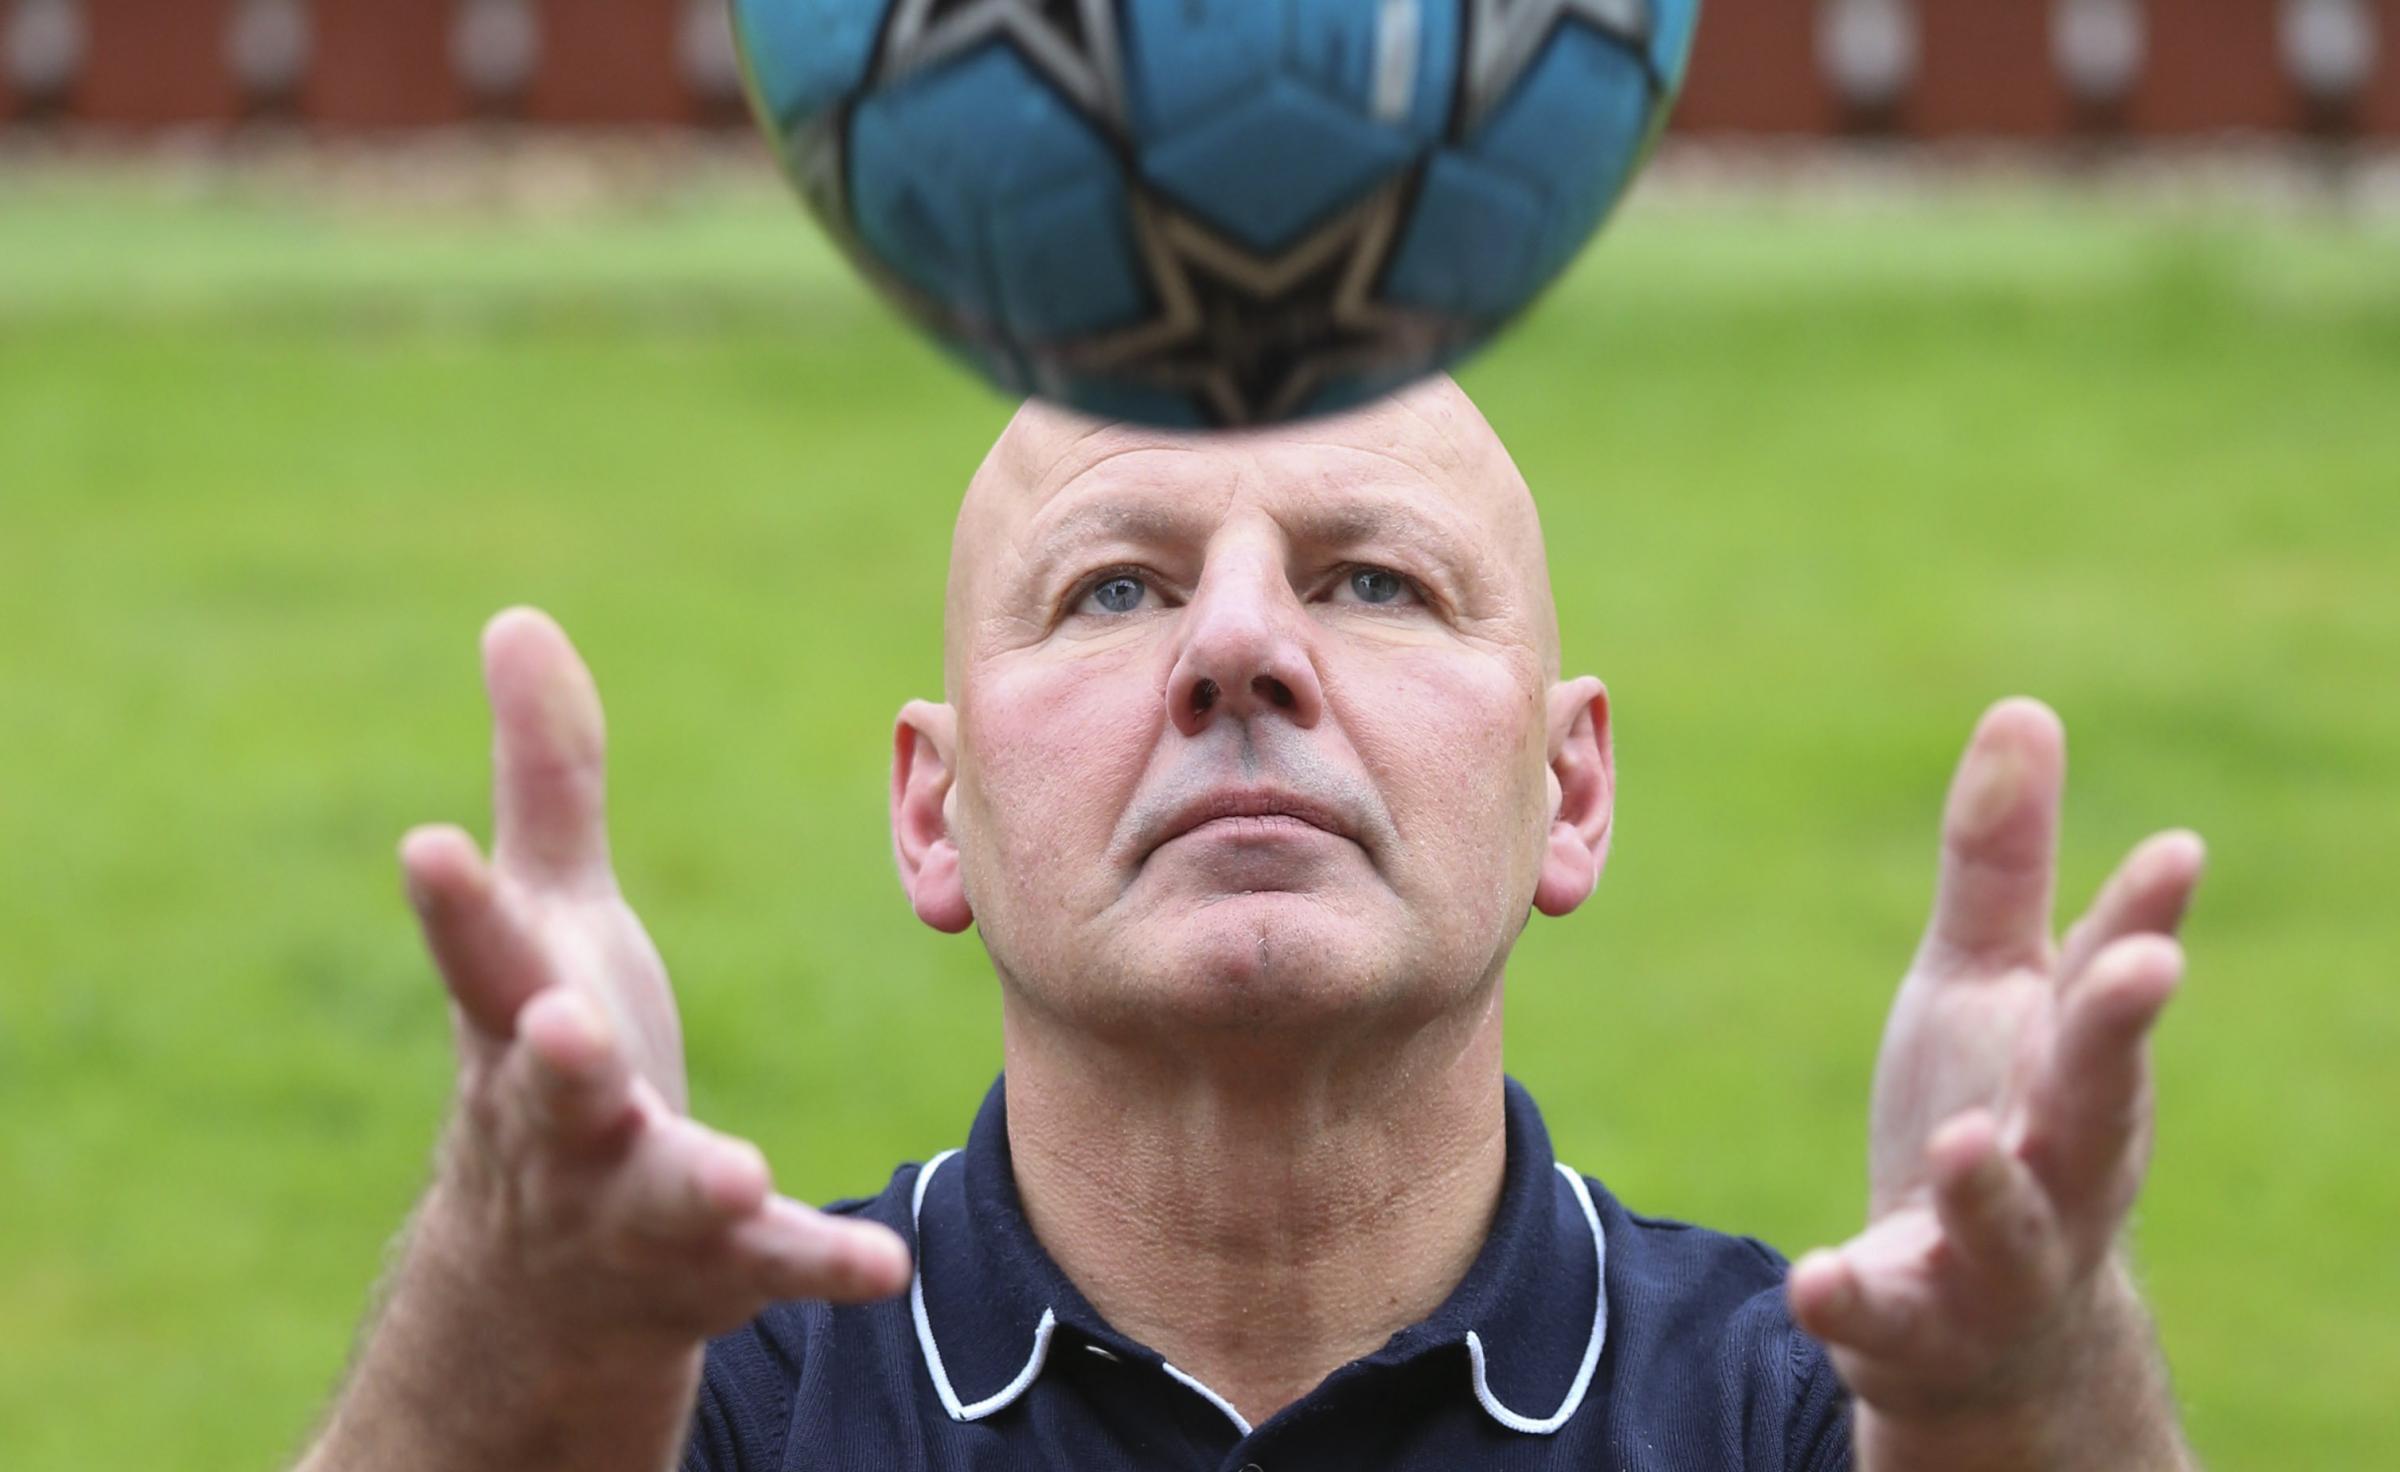 Football left me with Alzheimer's at 58: Kevin Hetherington tells his story